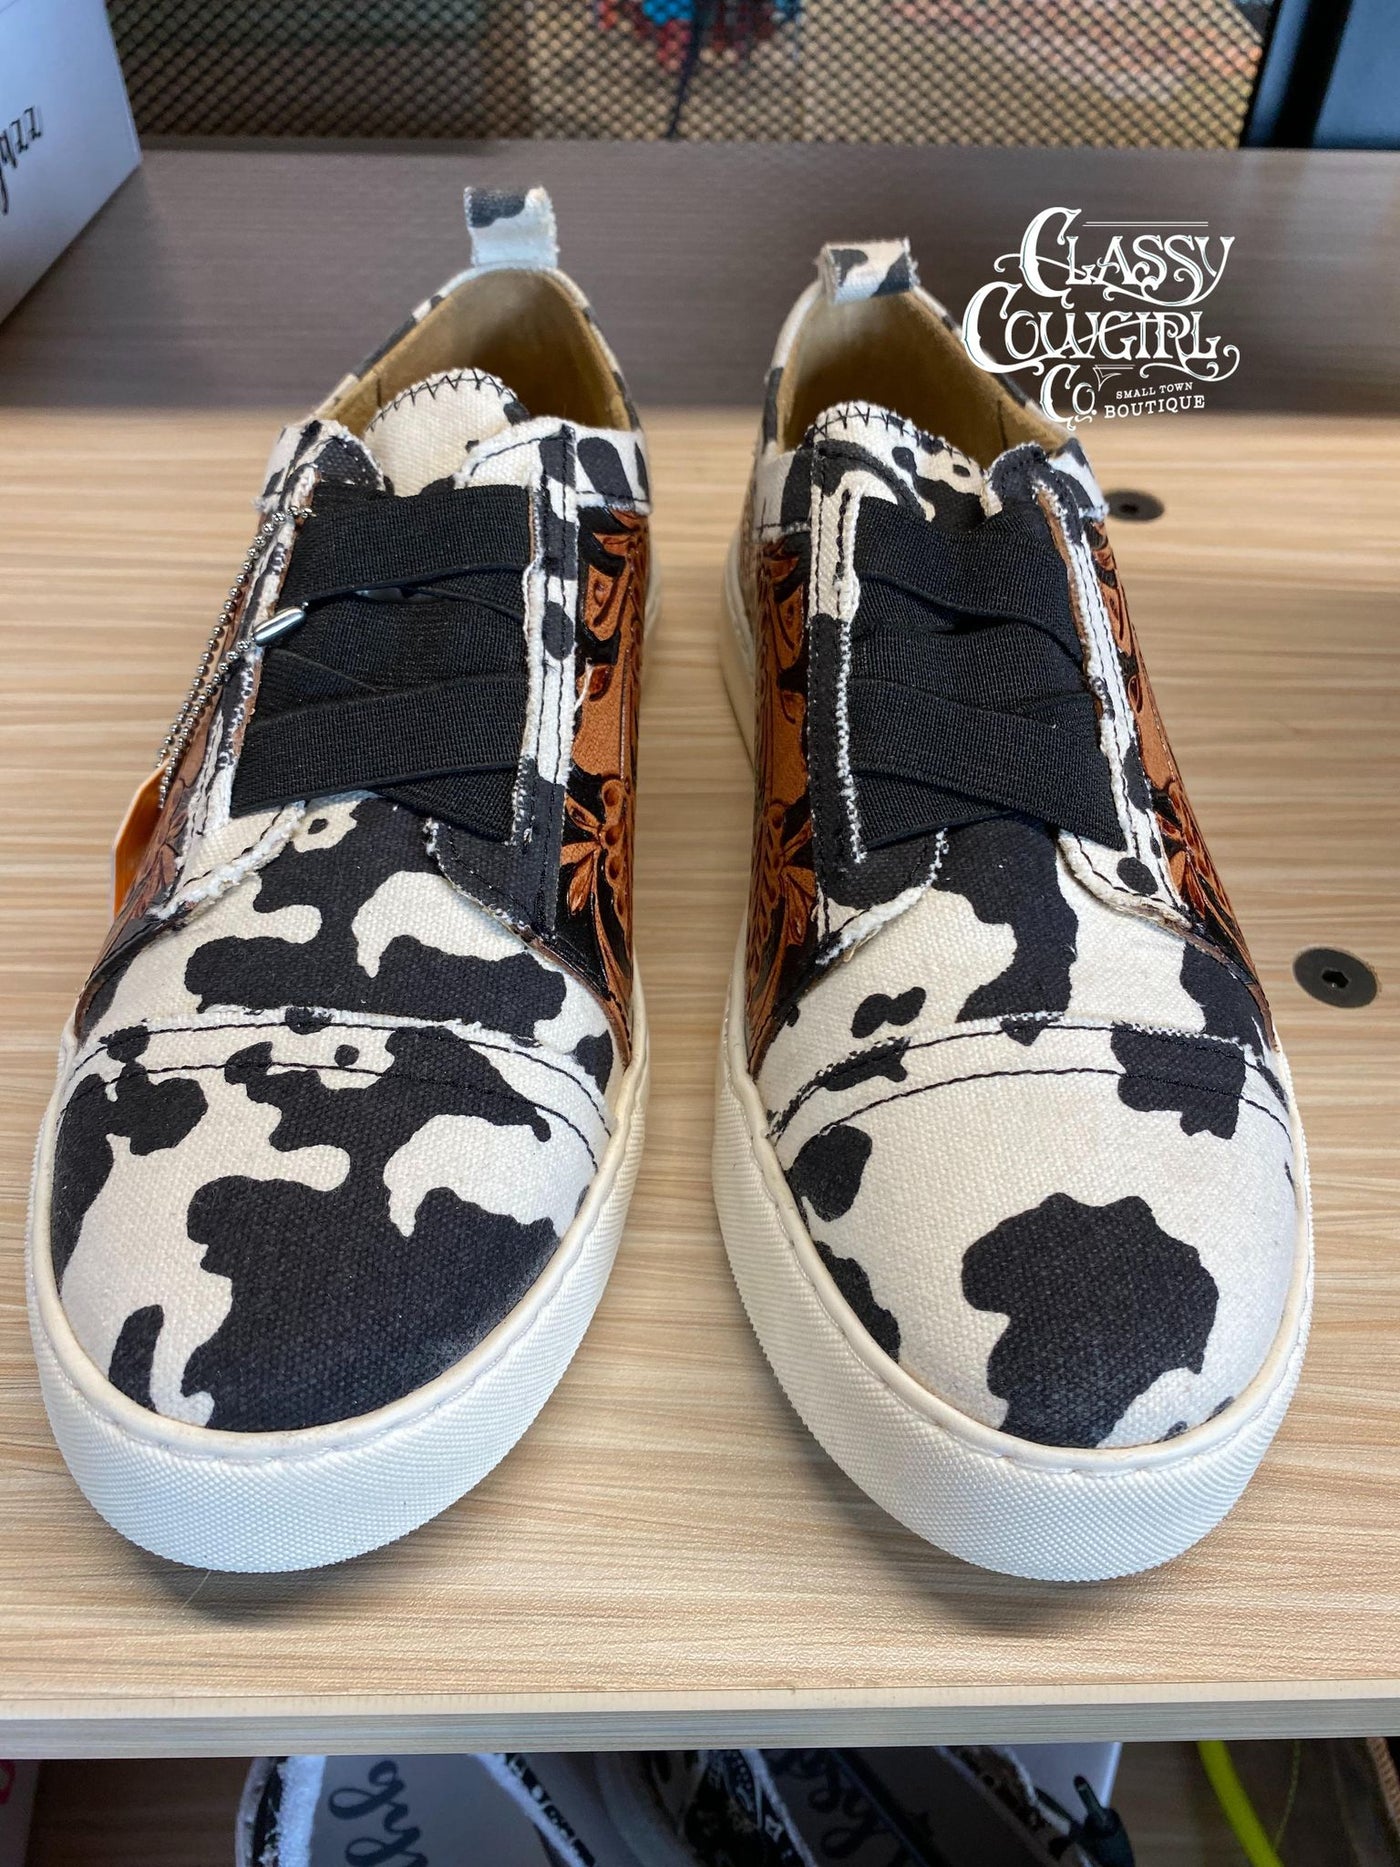 Cowprint Canvas & Tooled Leather Sneakers